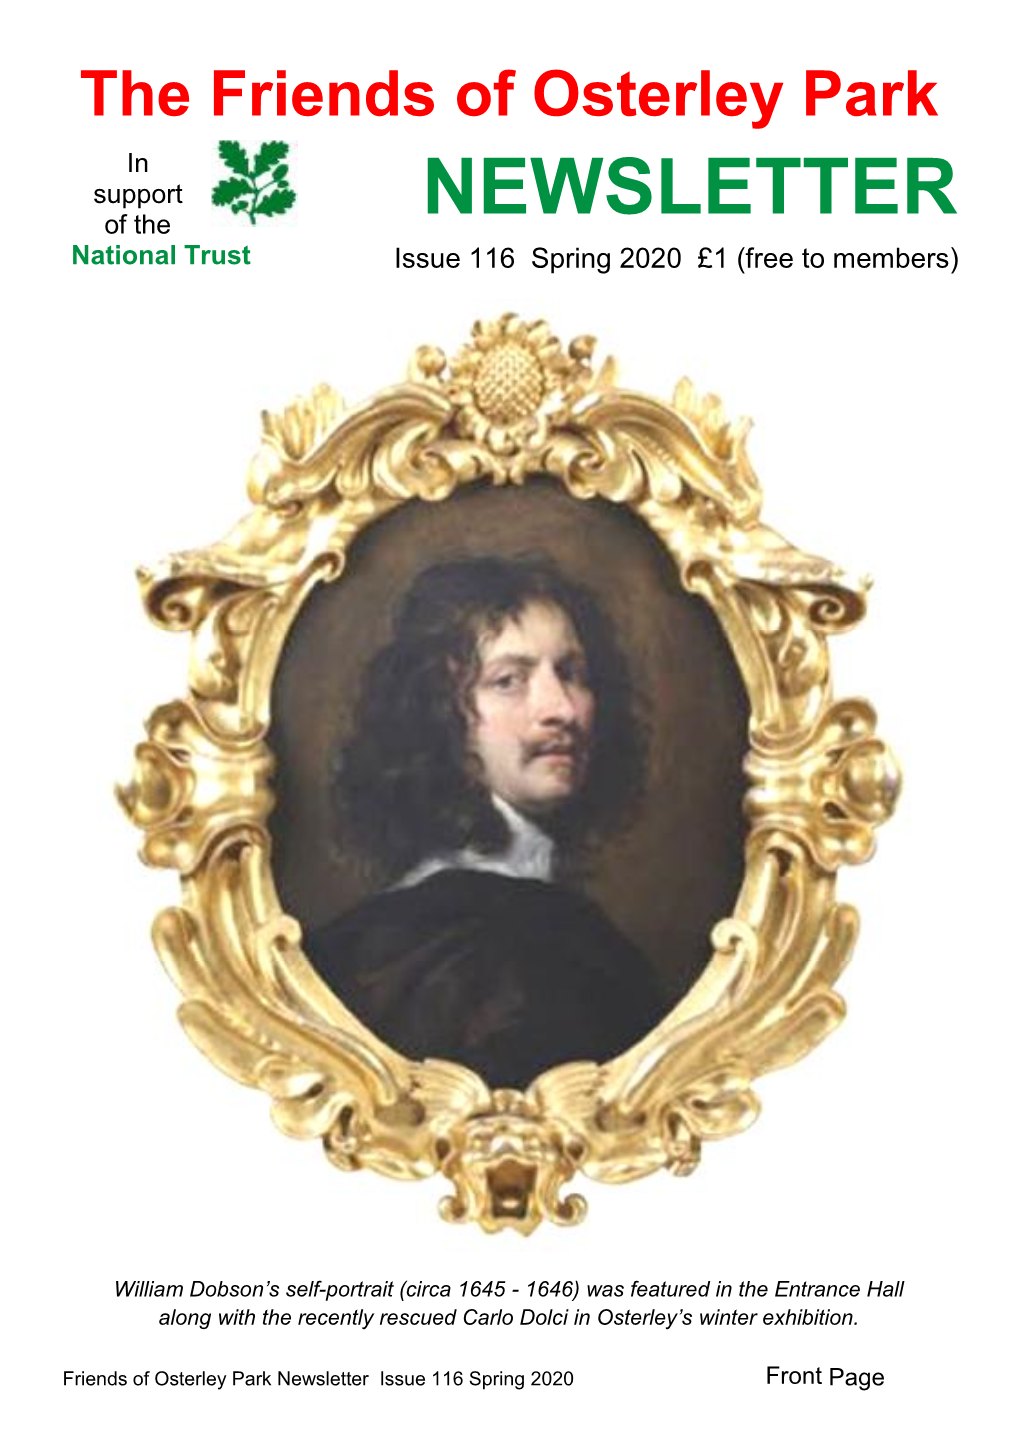 NEWSLETTER National Trust Issue 116 Spring 2020 £1 (Free to Members)